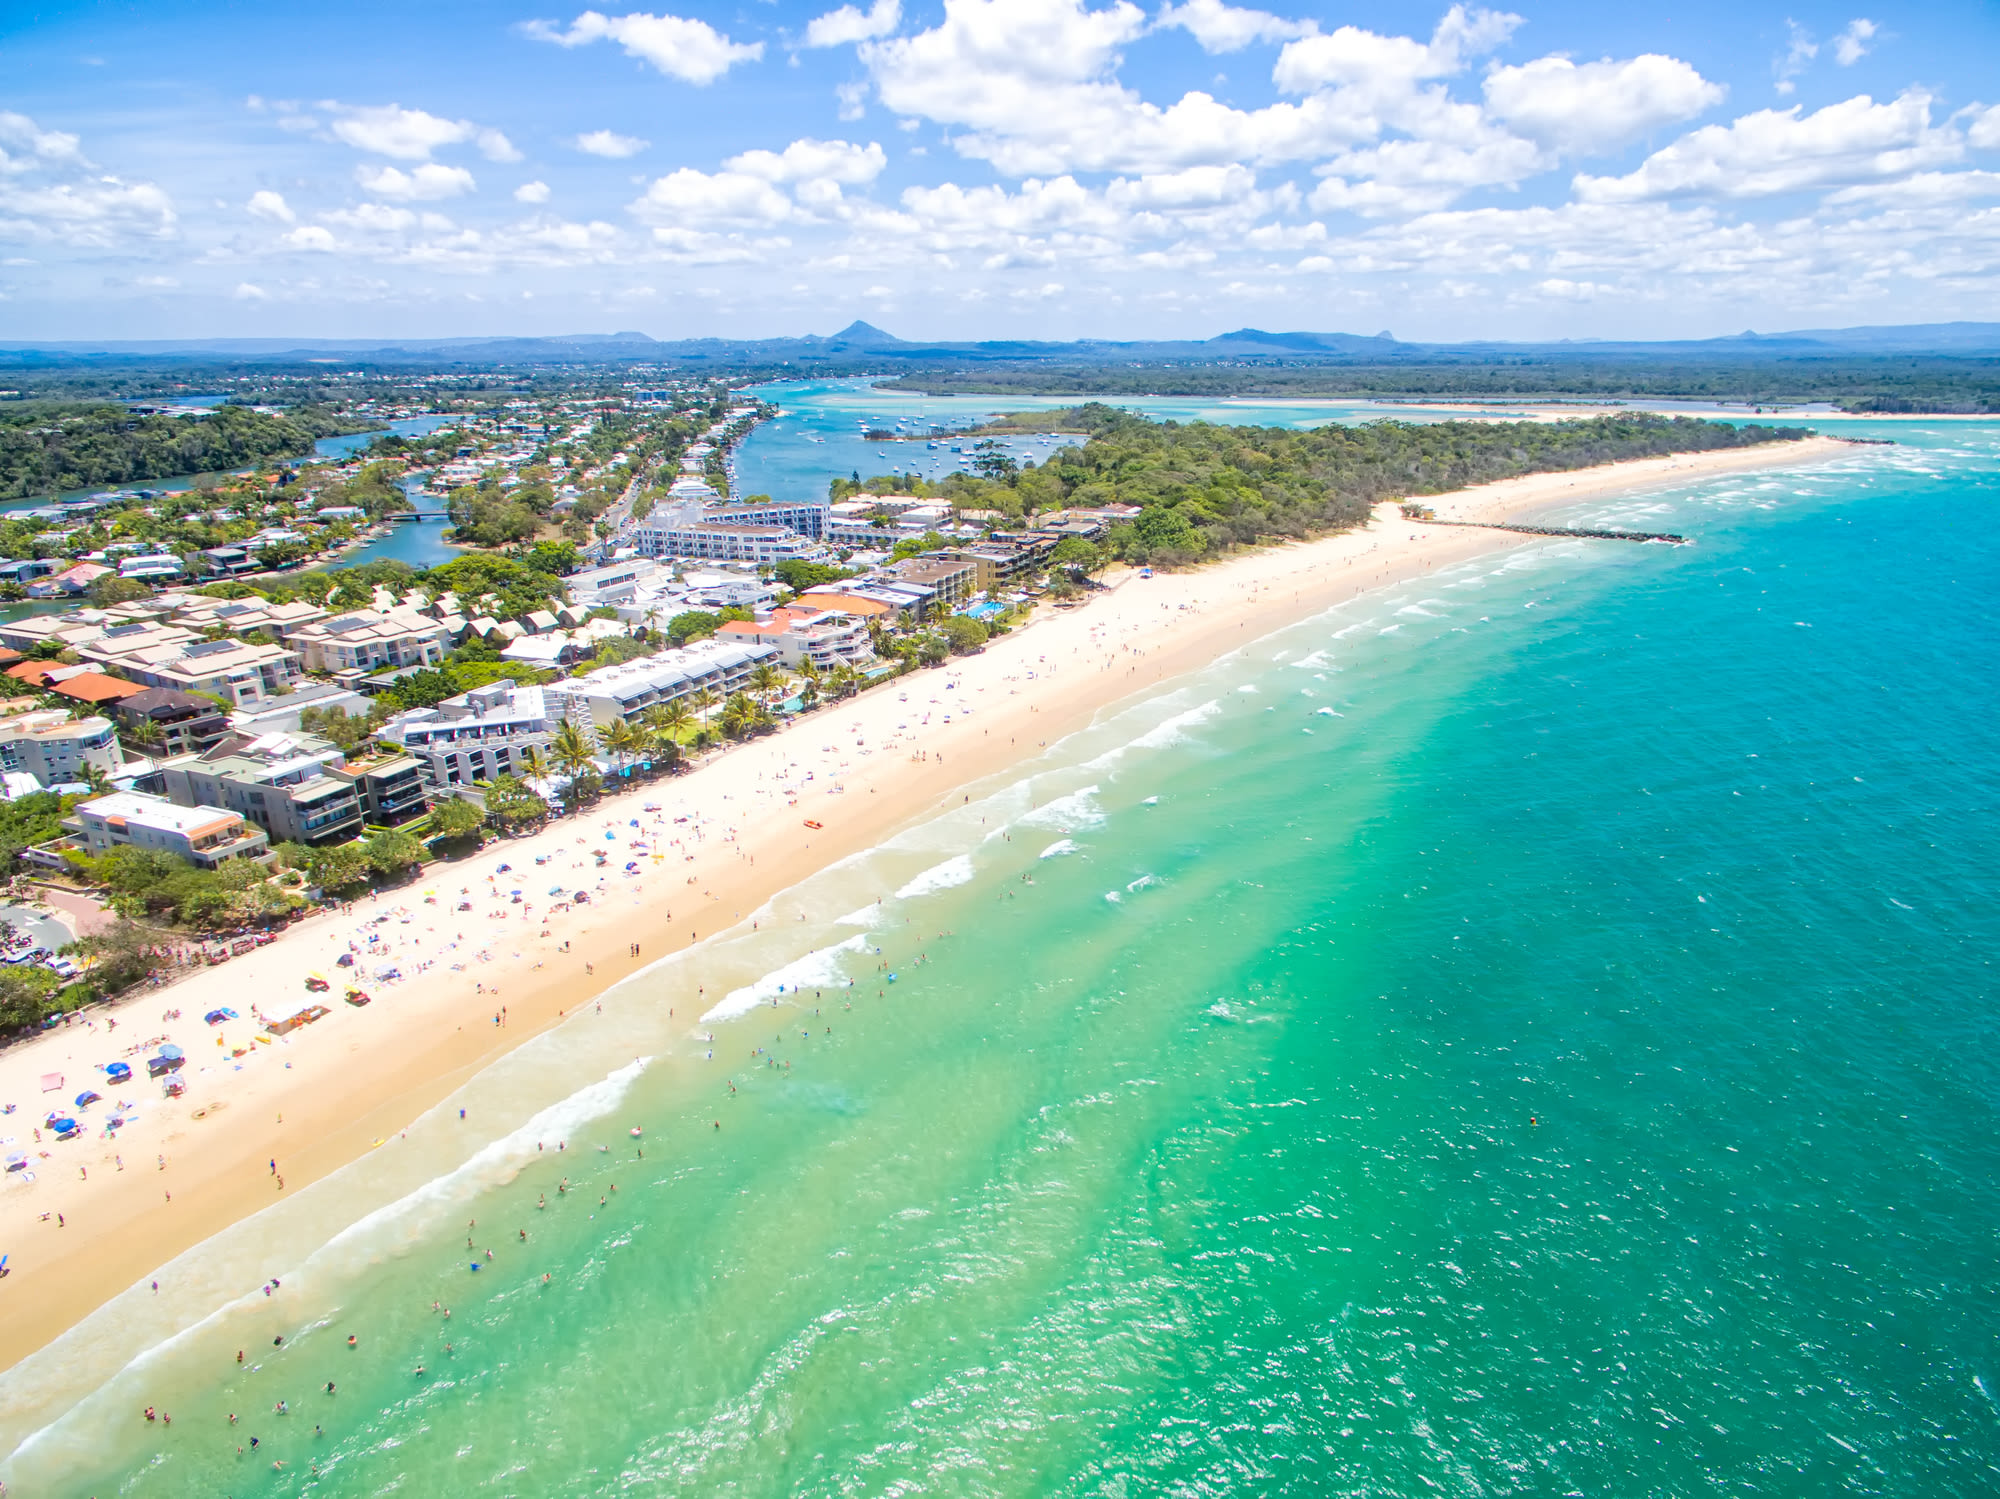 Property management in Noosa